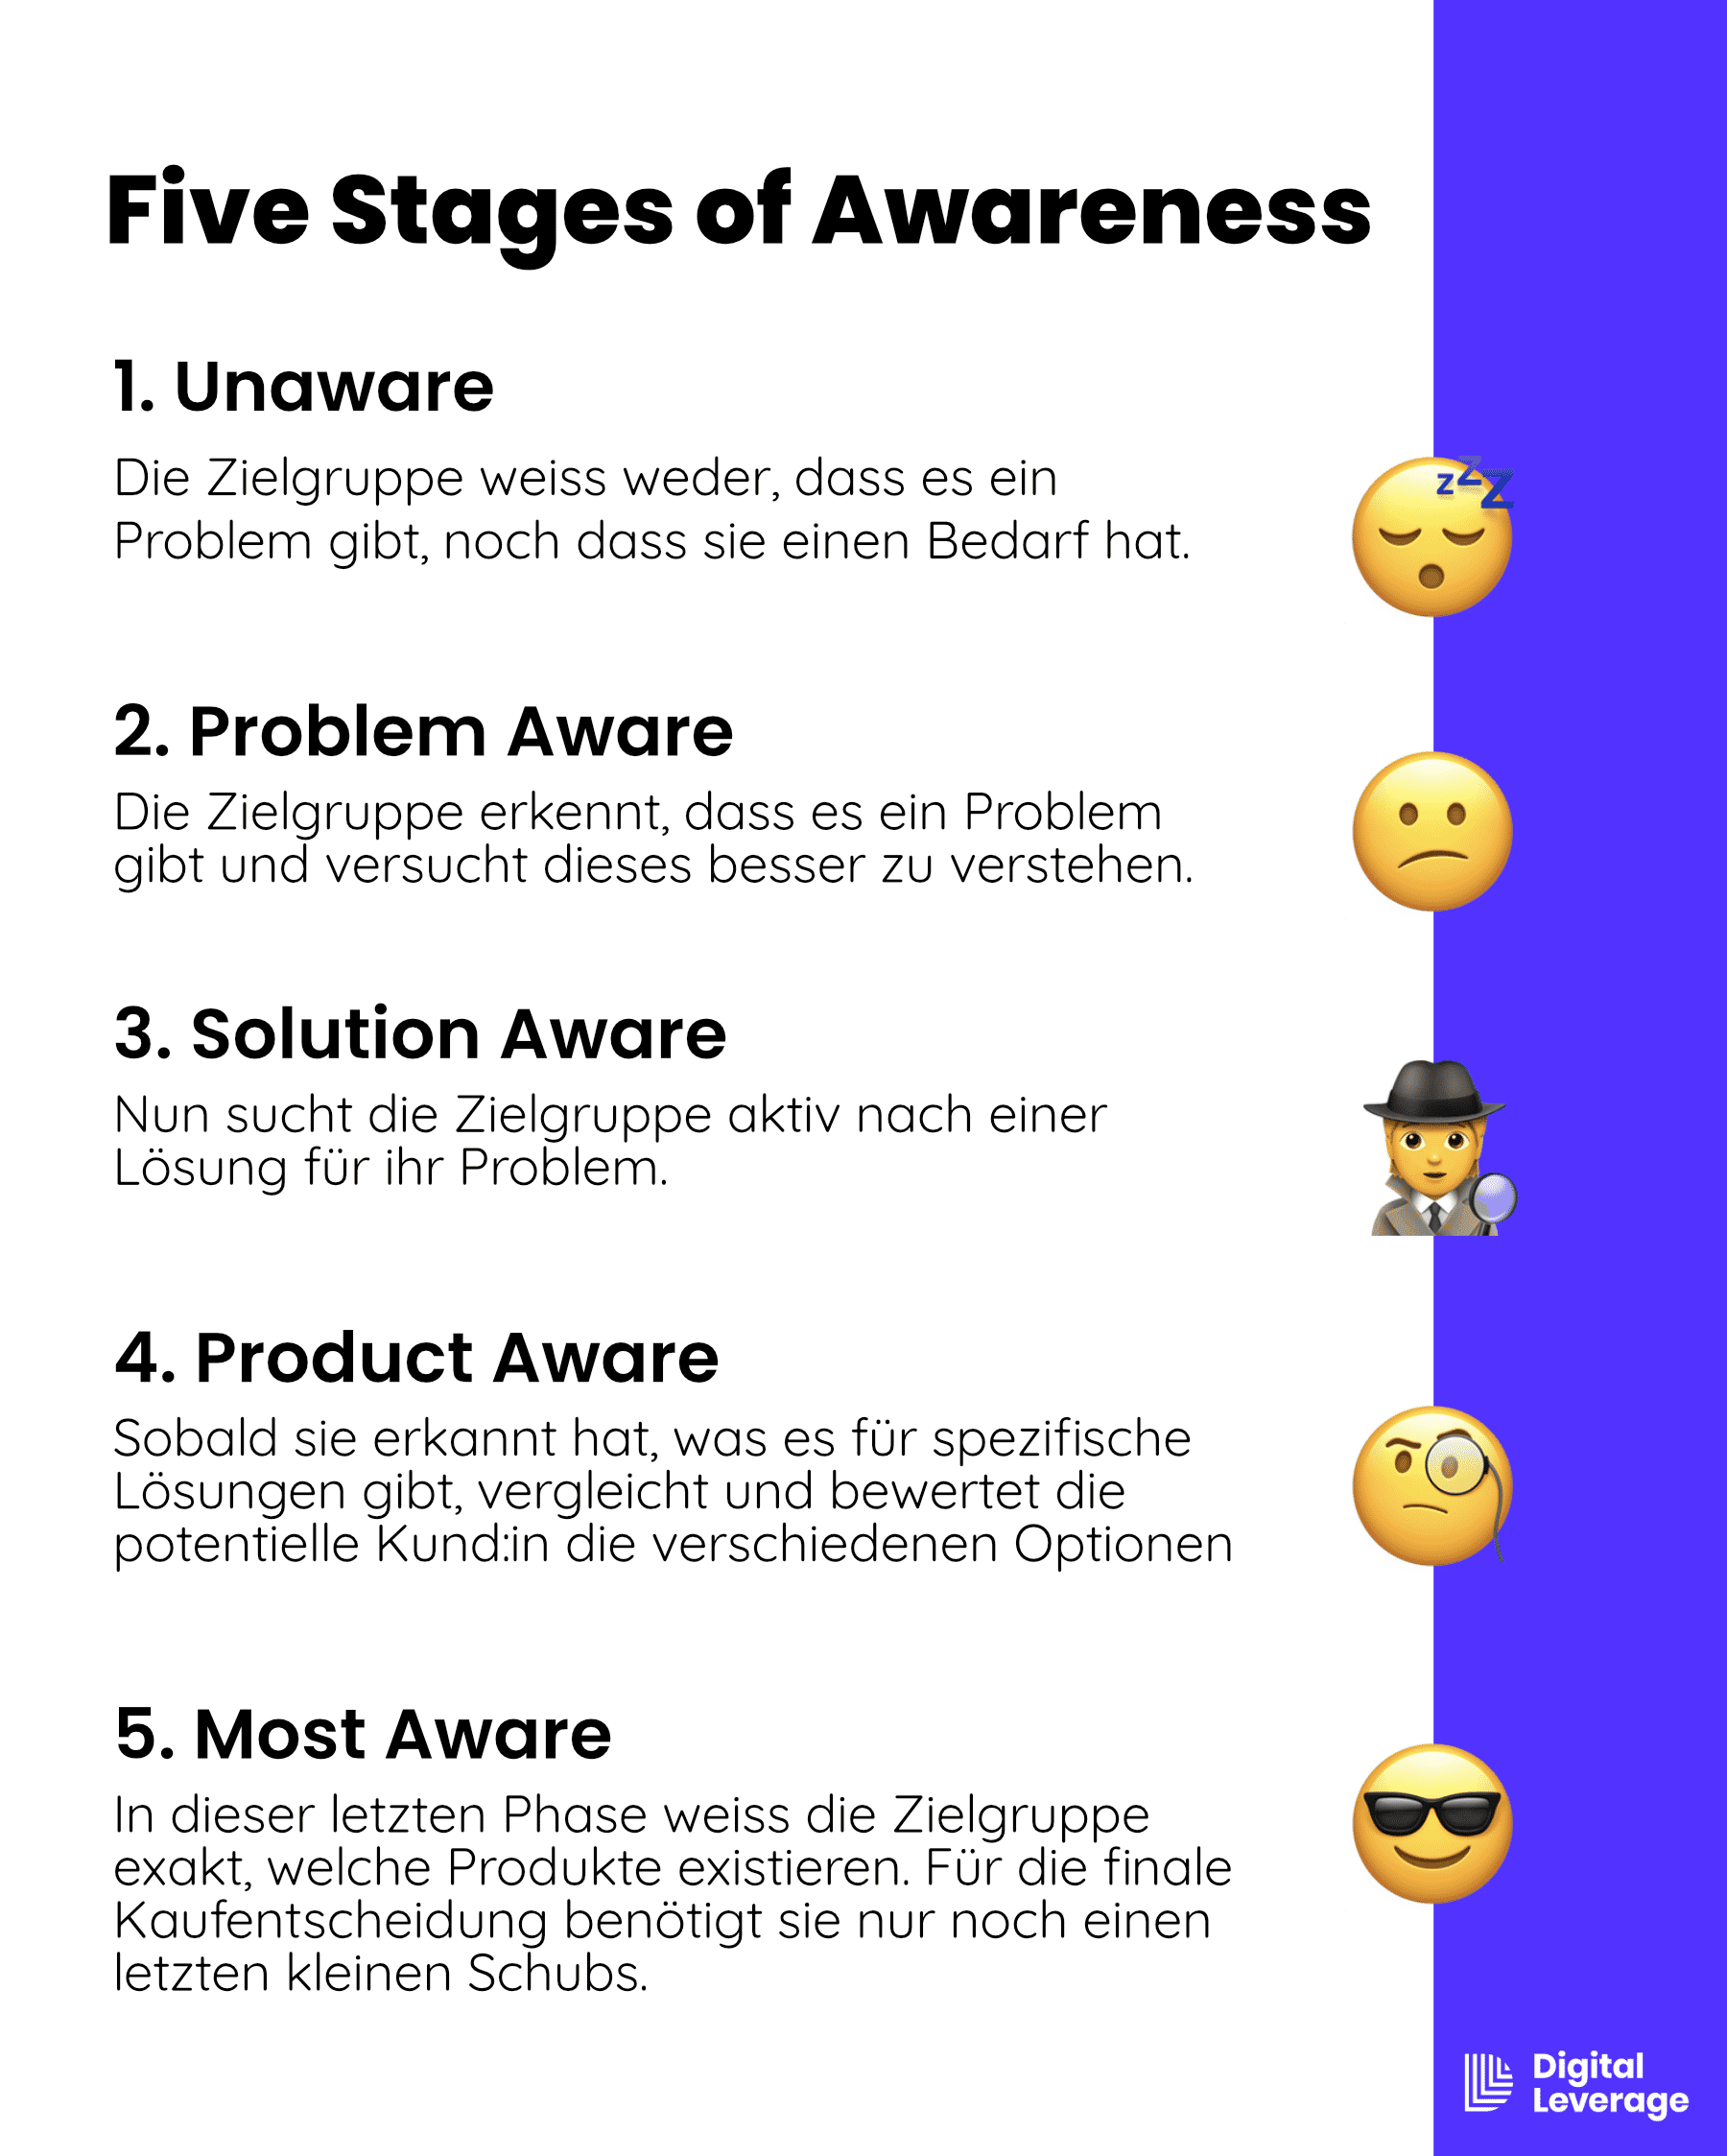 Definition 5 Stages of Awareness